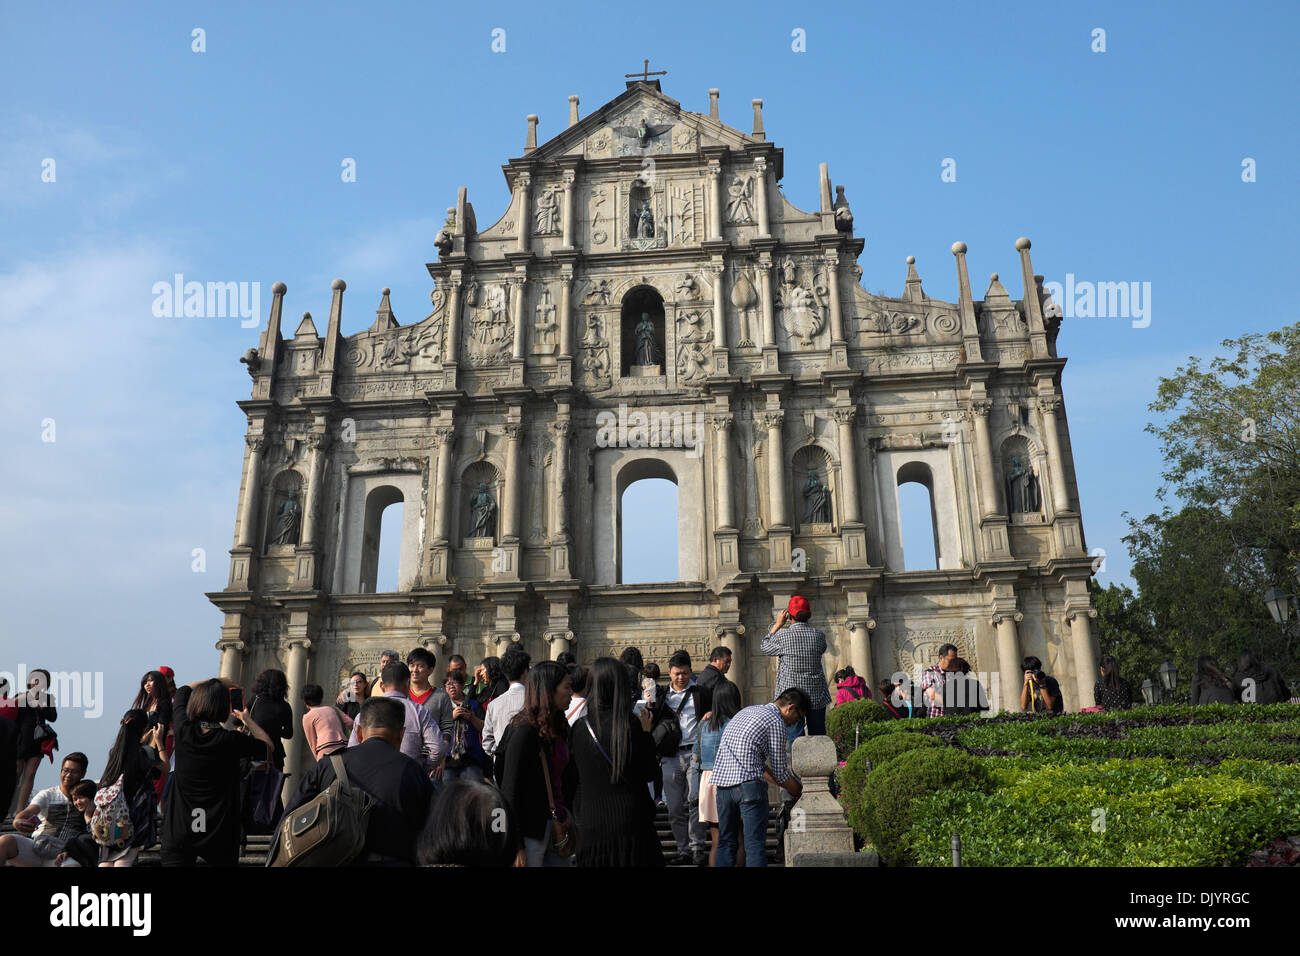 Crowds at the Ruins of Church of St. Paul in Macau, China Stock Photo